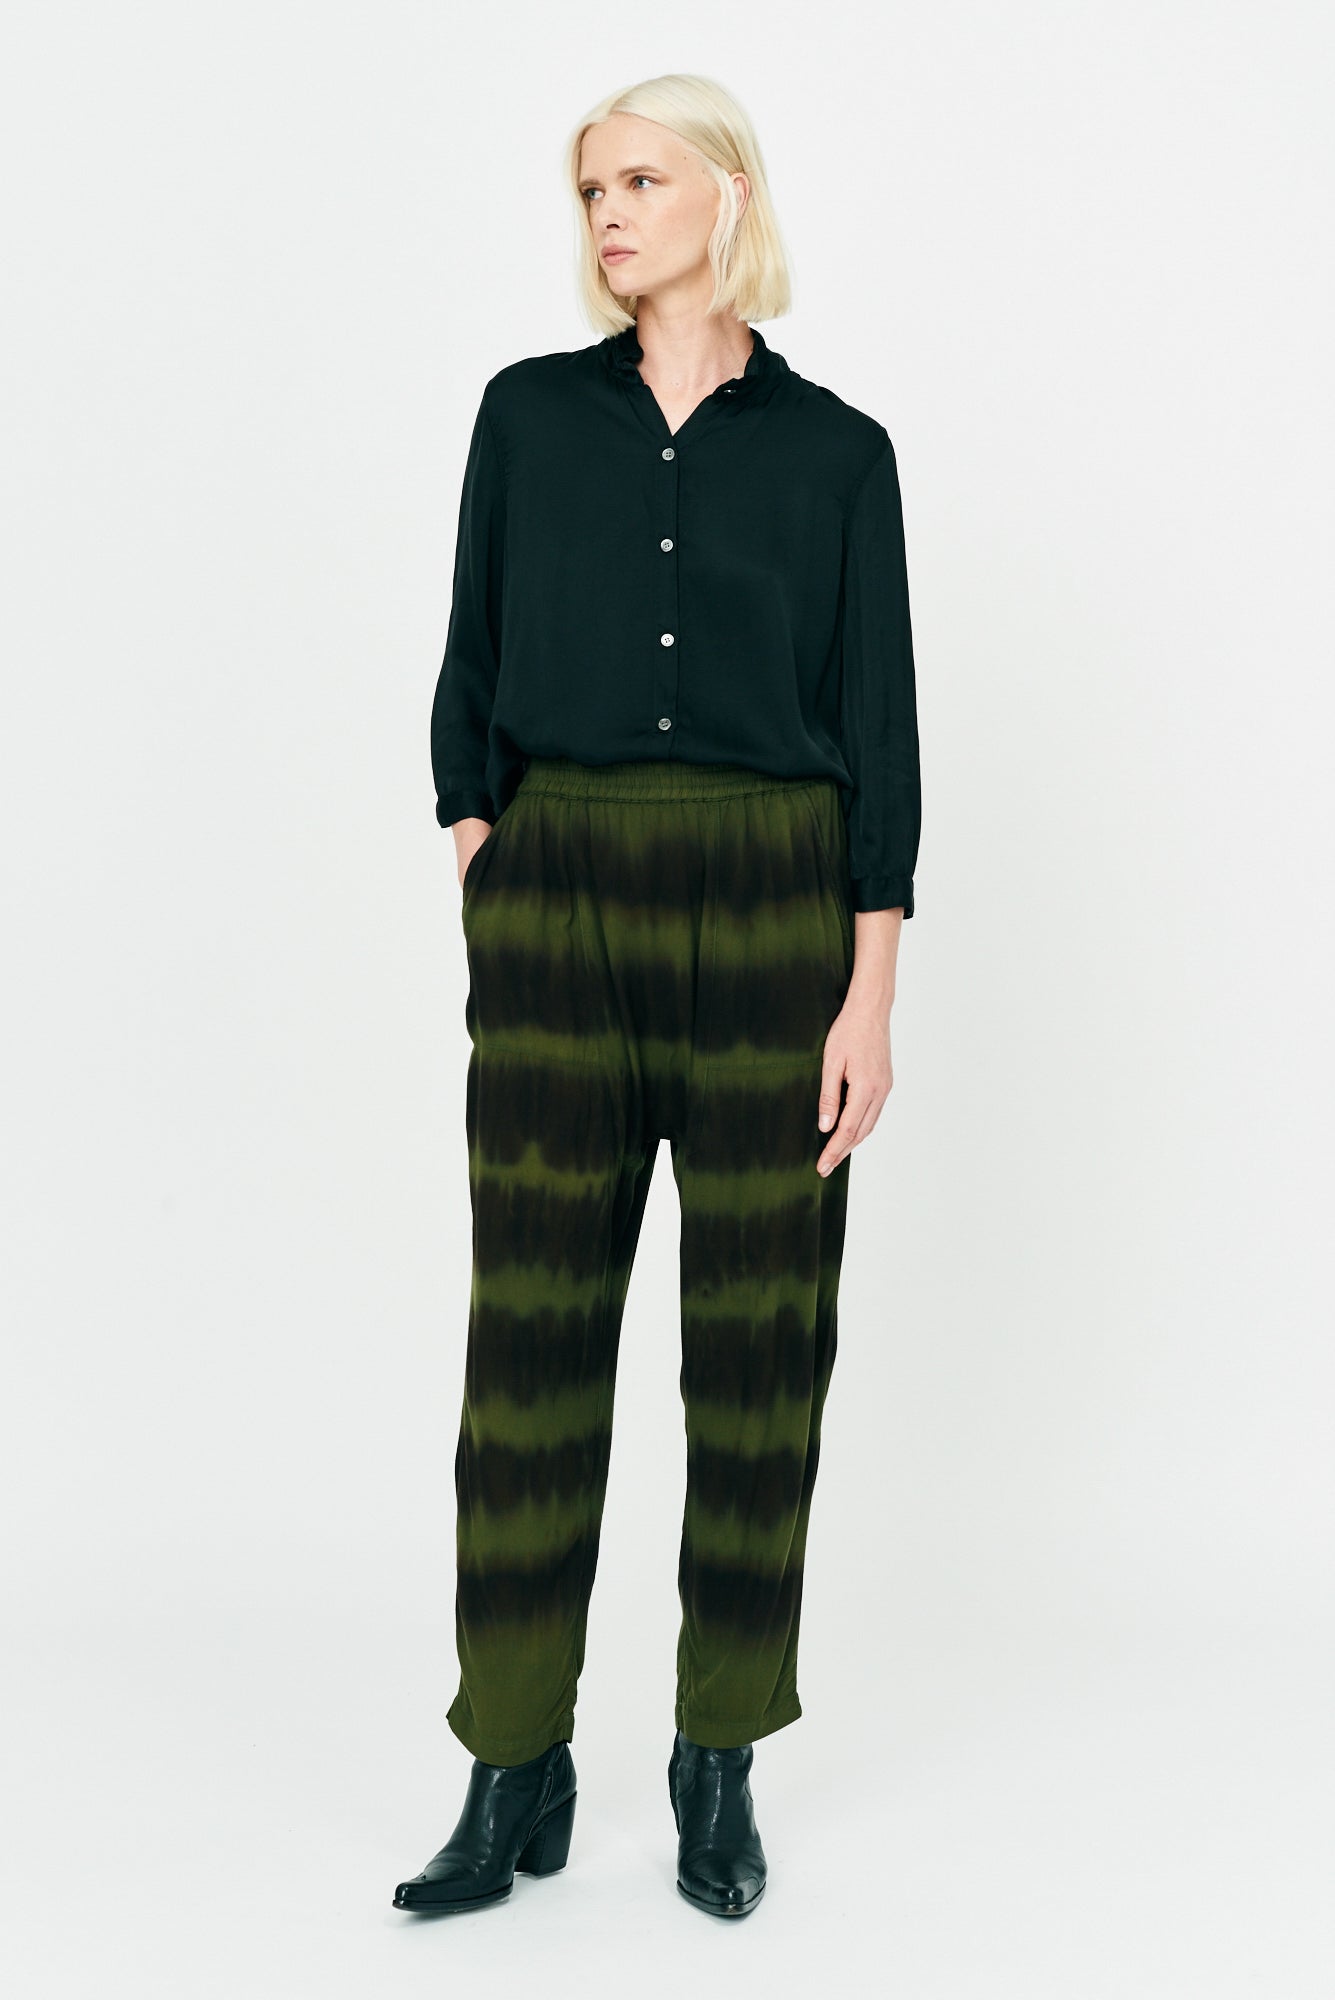 Forest Black and Stripes Tie Dye Ghost Ranch Soft Twill Sunday Pant Full Front View